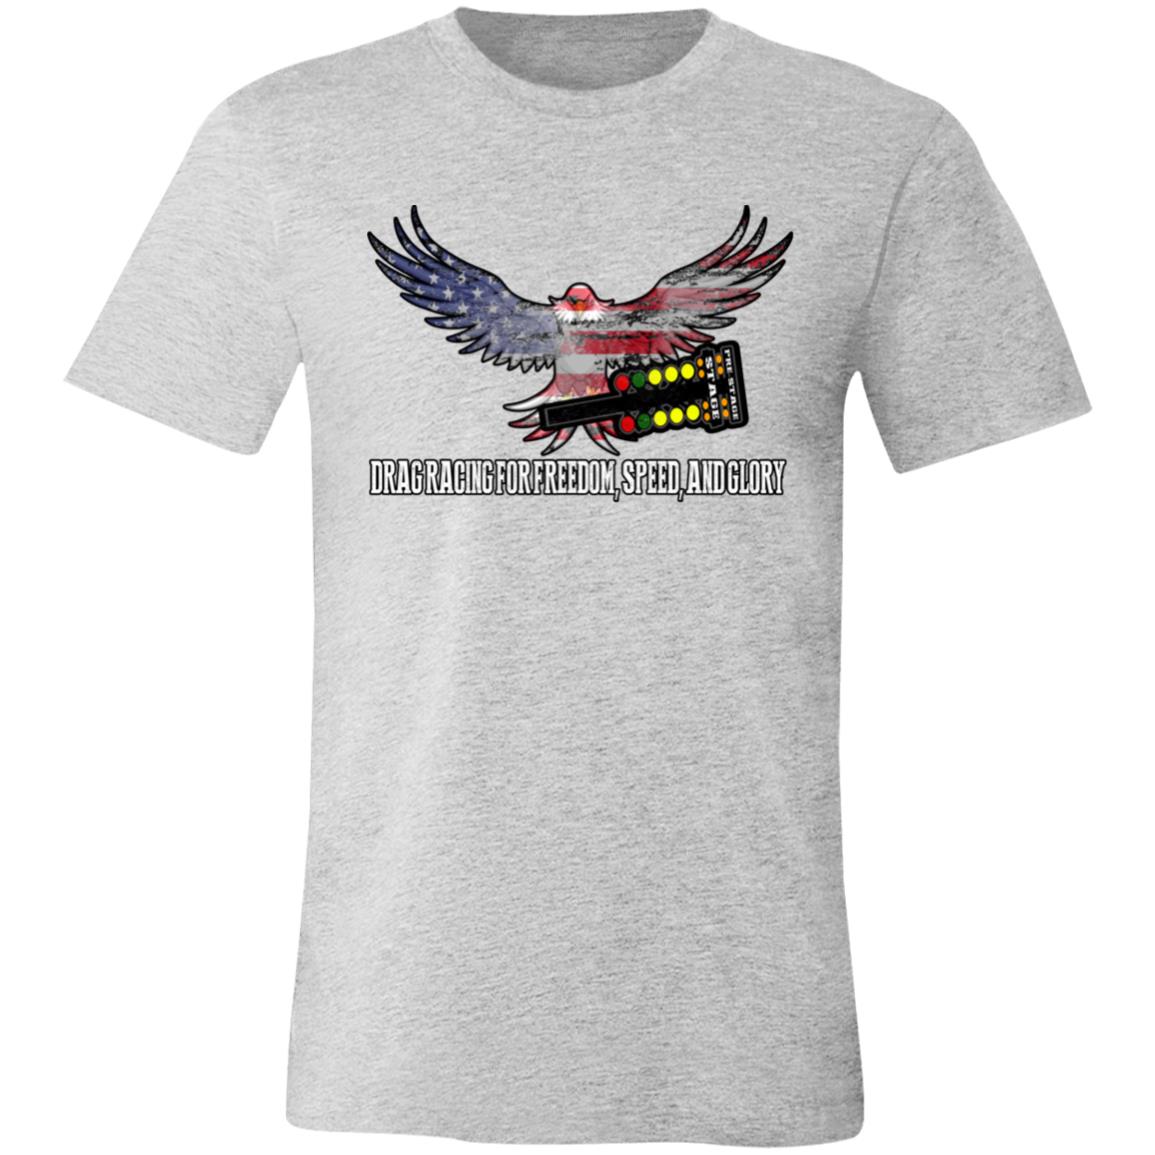 Drag Racing for Freedom, Speed, and Glory Unisex Jersey Short-Sleeve T-Shirt